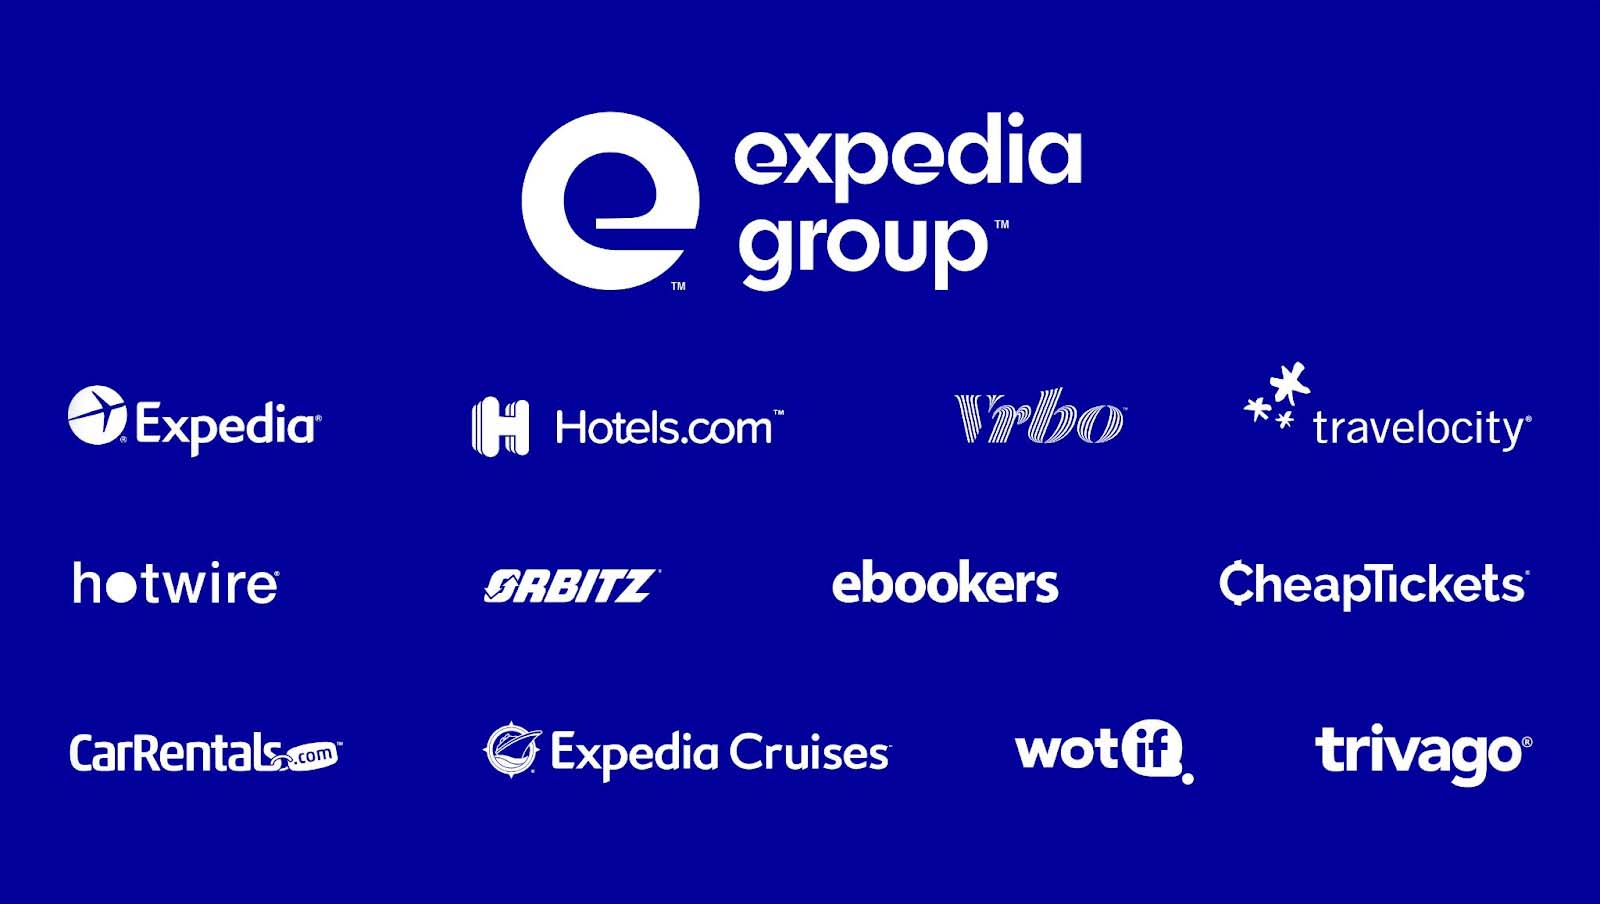 Expedia Group brands